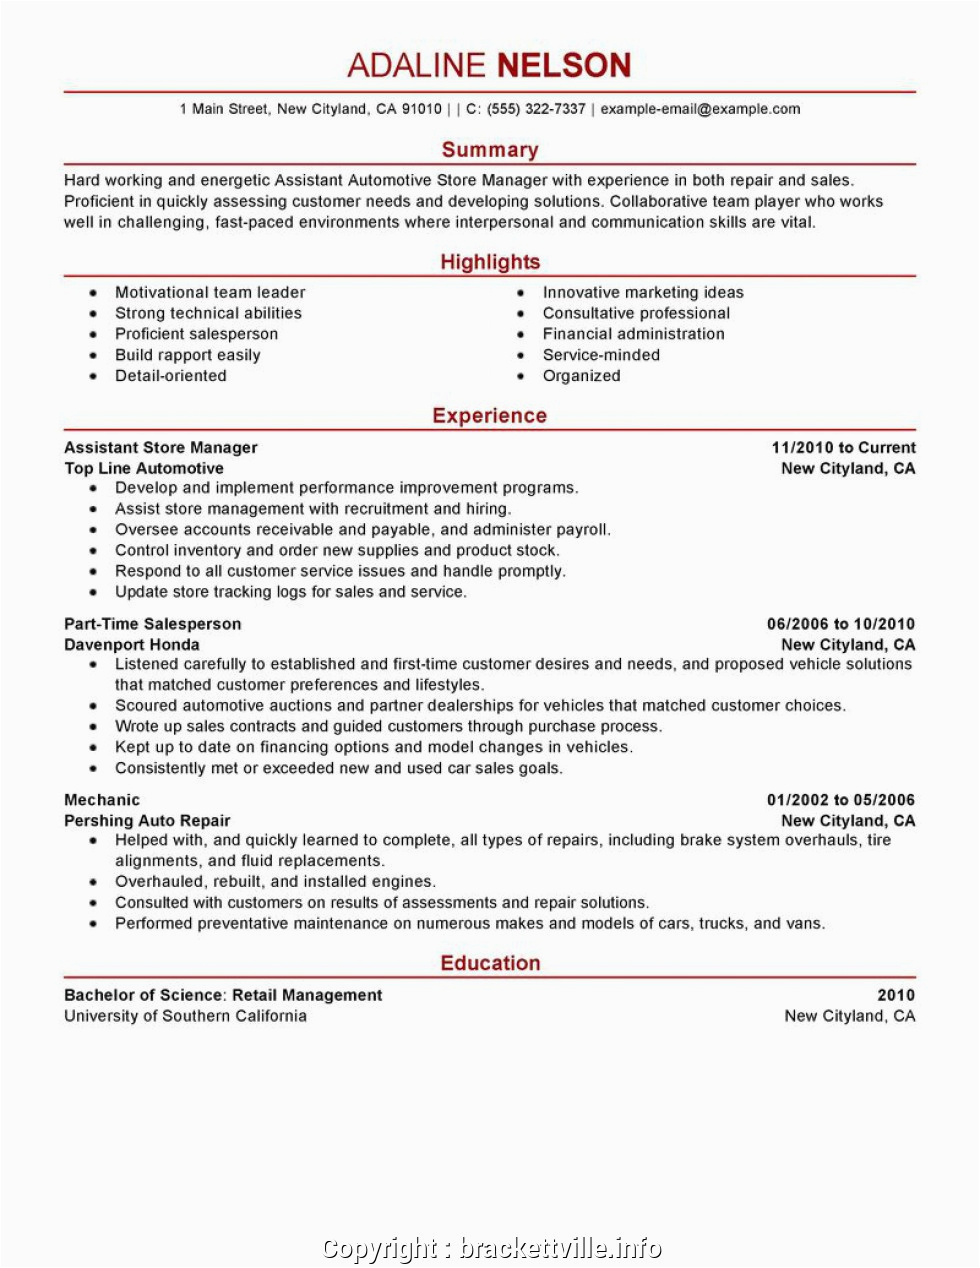 Retail Management Resume Examples and Samples Best Retail Outlet Manager Resume Retail Resume Template